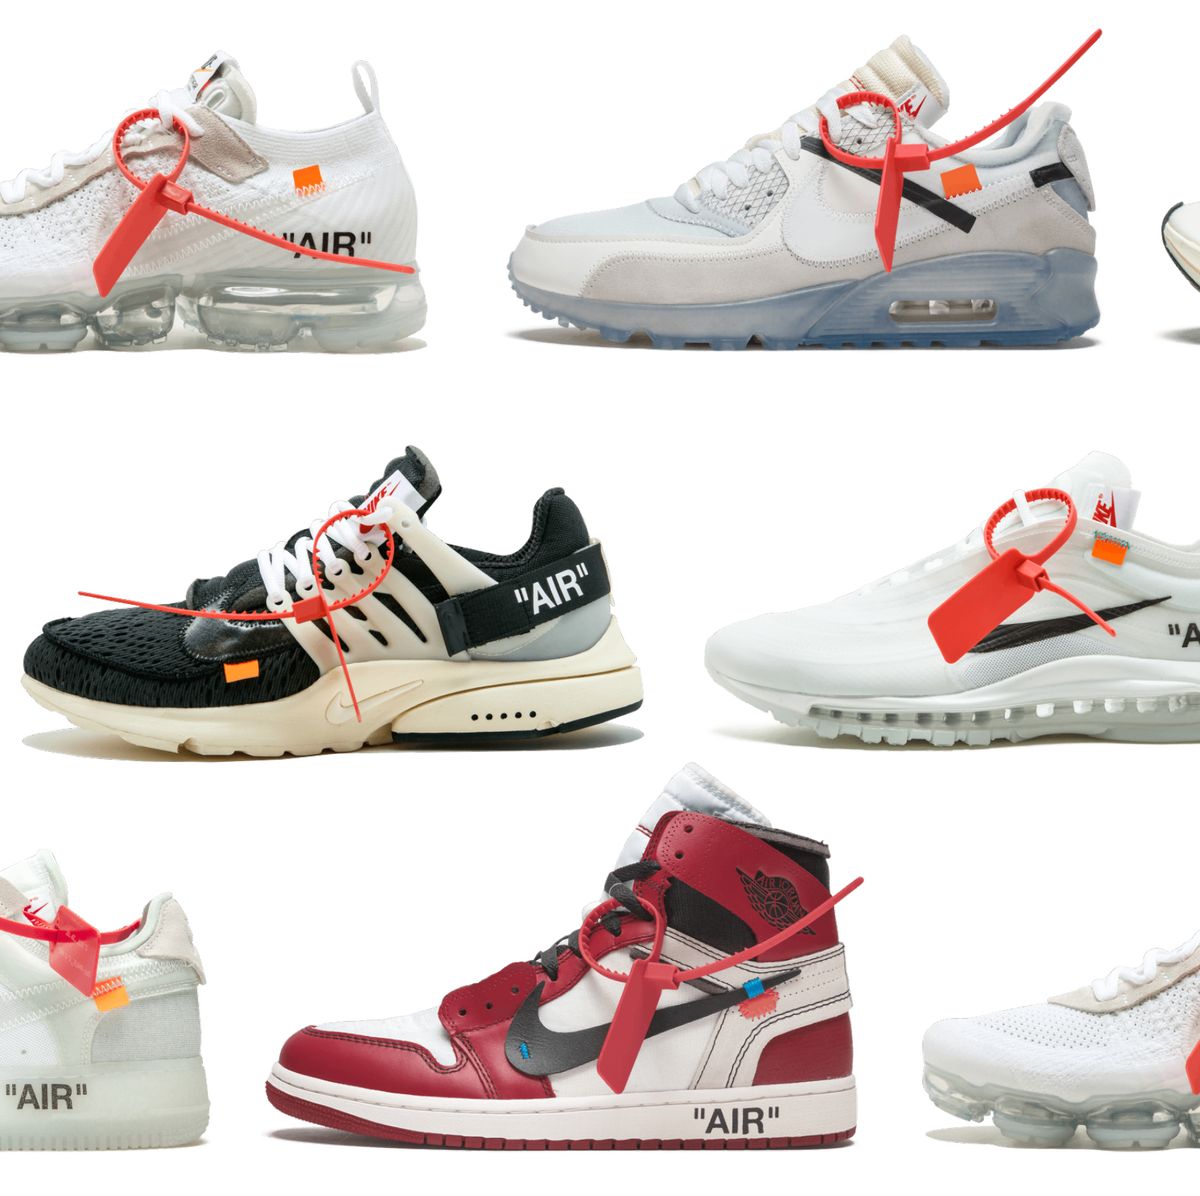 Best Nike Off-White Shoes | Nike Off-White Releases 2019